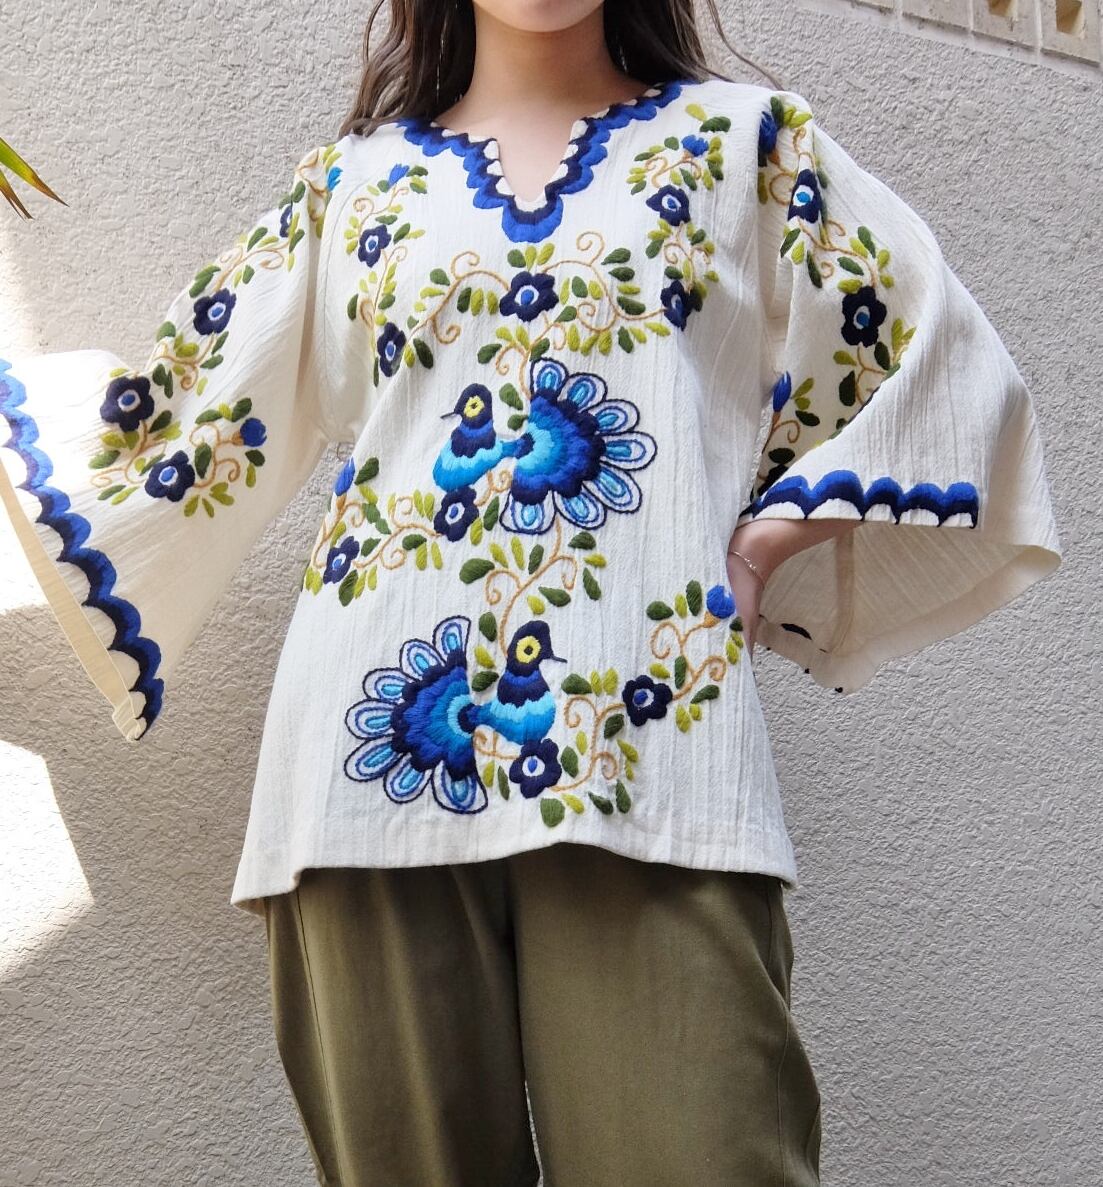 Embroidery vintage tunic／ヴィンテージ 刺繍 チュニック | BIG TIME ...